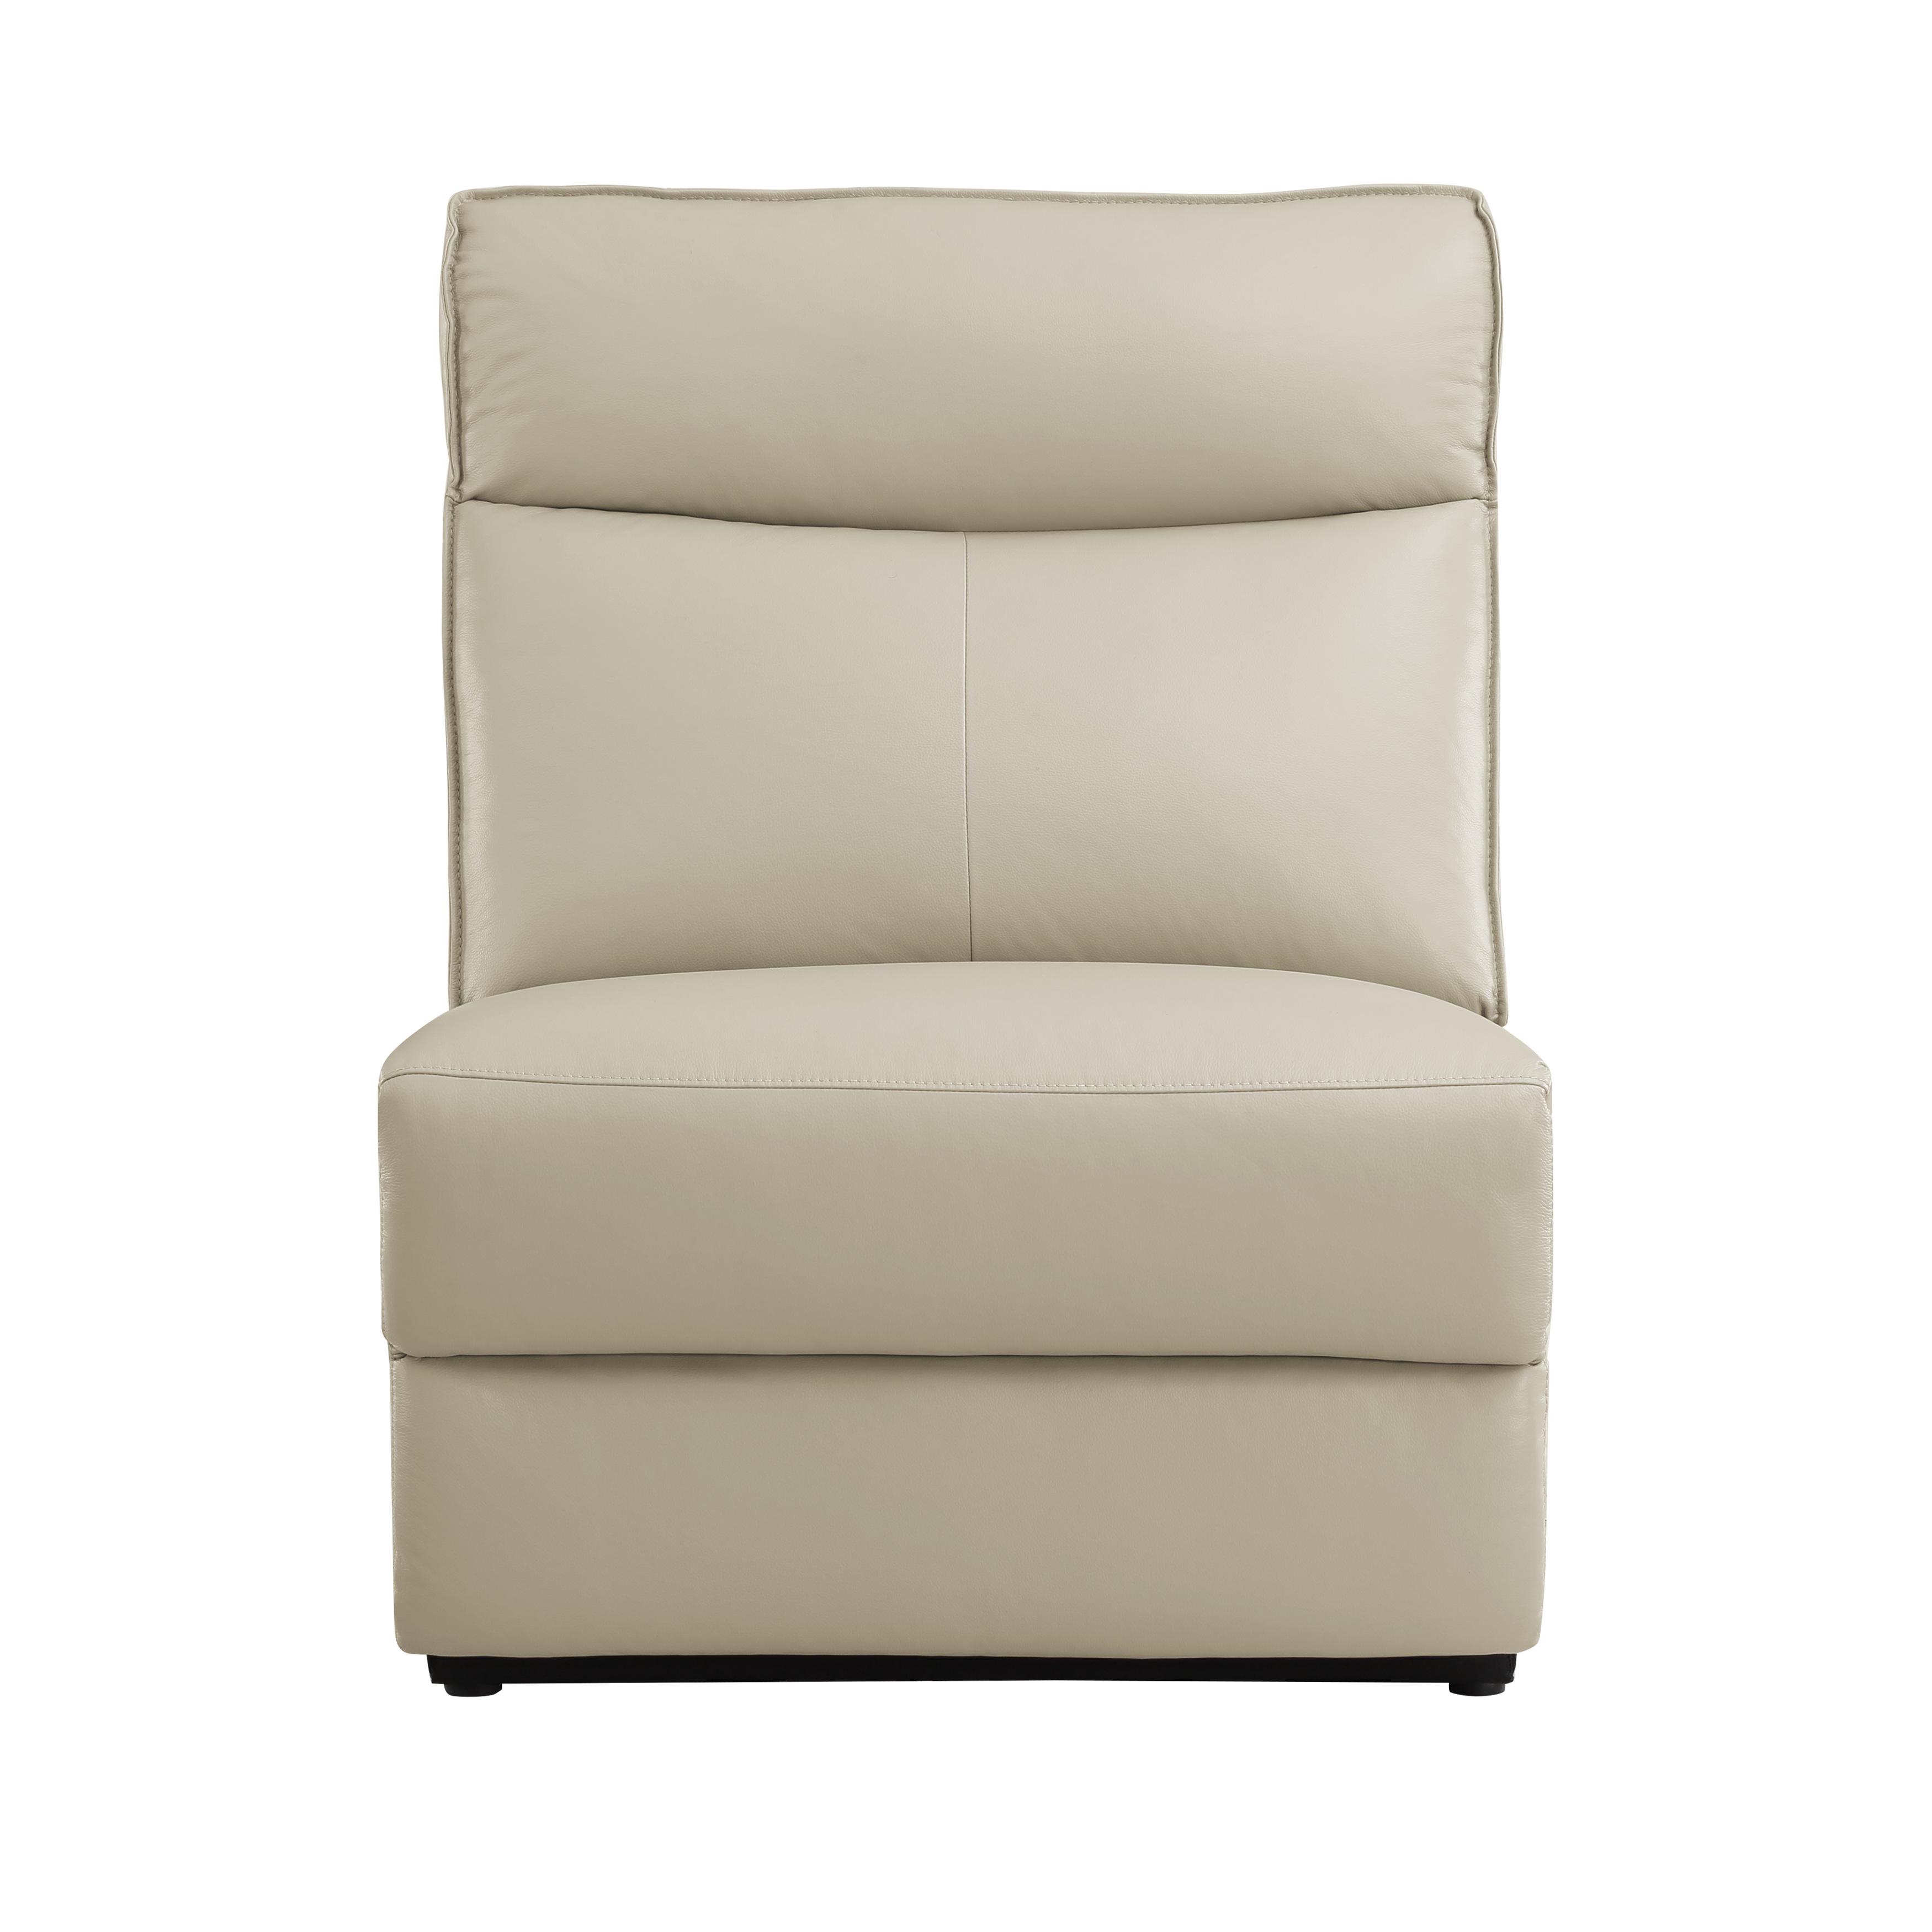 Classic Armless Chair 8259RFTP-AC Maroni 8259RFTP-AC in Taupe Leather